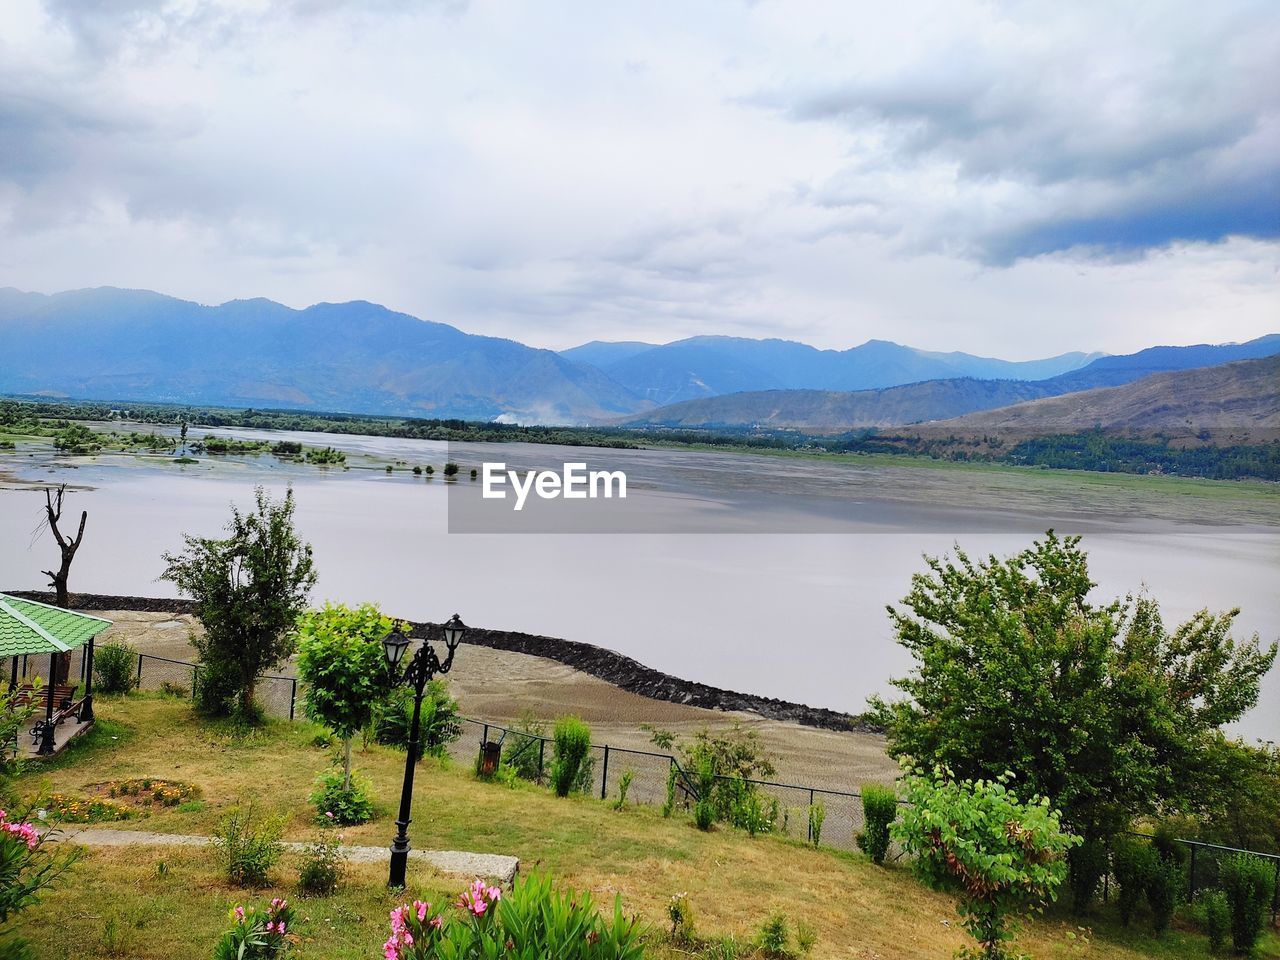 water, mountain, sky, scenics - nature, plant, environment, lake, nature, landscape, beauty in nature, reservoir, cloud, tranquility, highland, land, tranquil scene, tree, travel destinations, mountain range, no people, travel, day, non-urban scene, body of water, outdoors, grass, rural area, tourism, beach, coast, shore, rural scene, architecture, idyllic